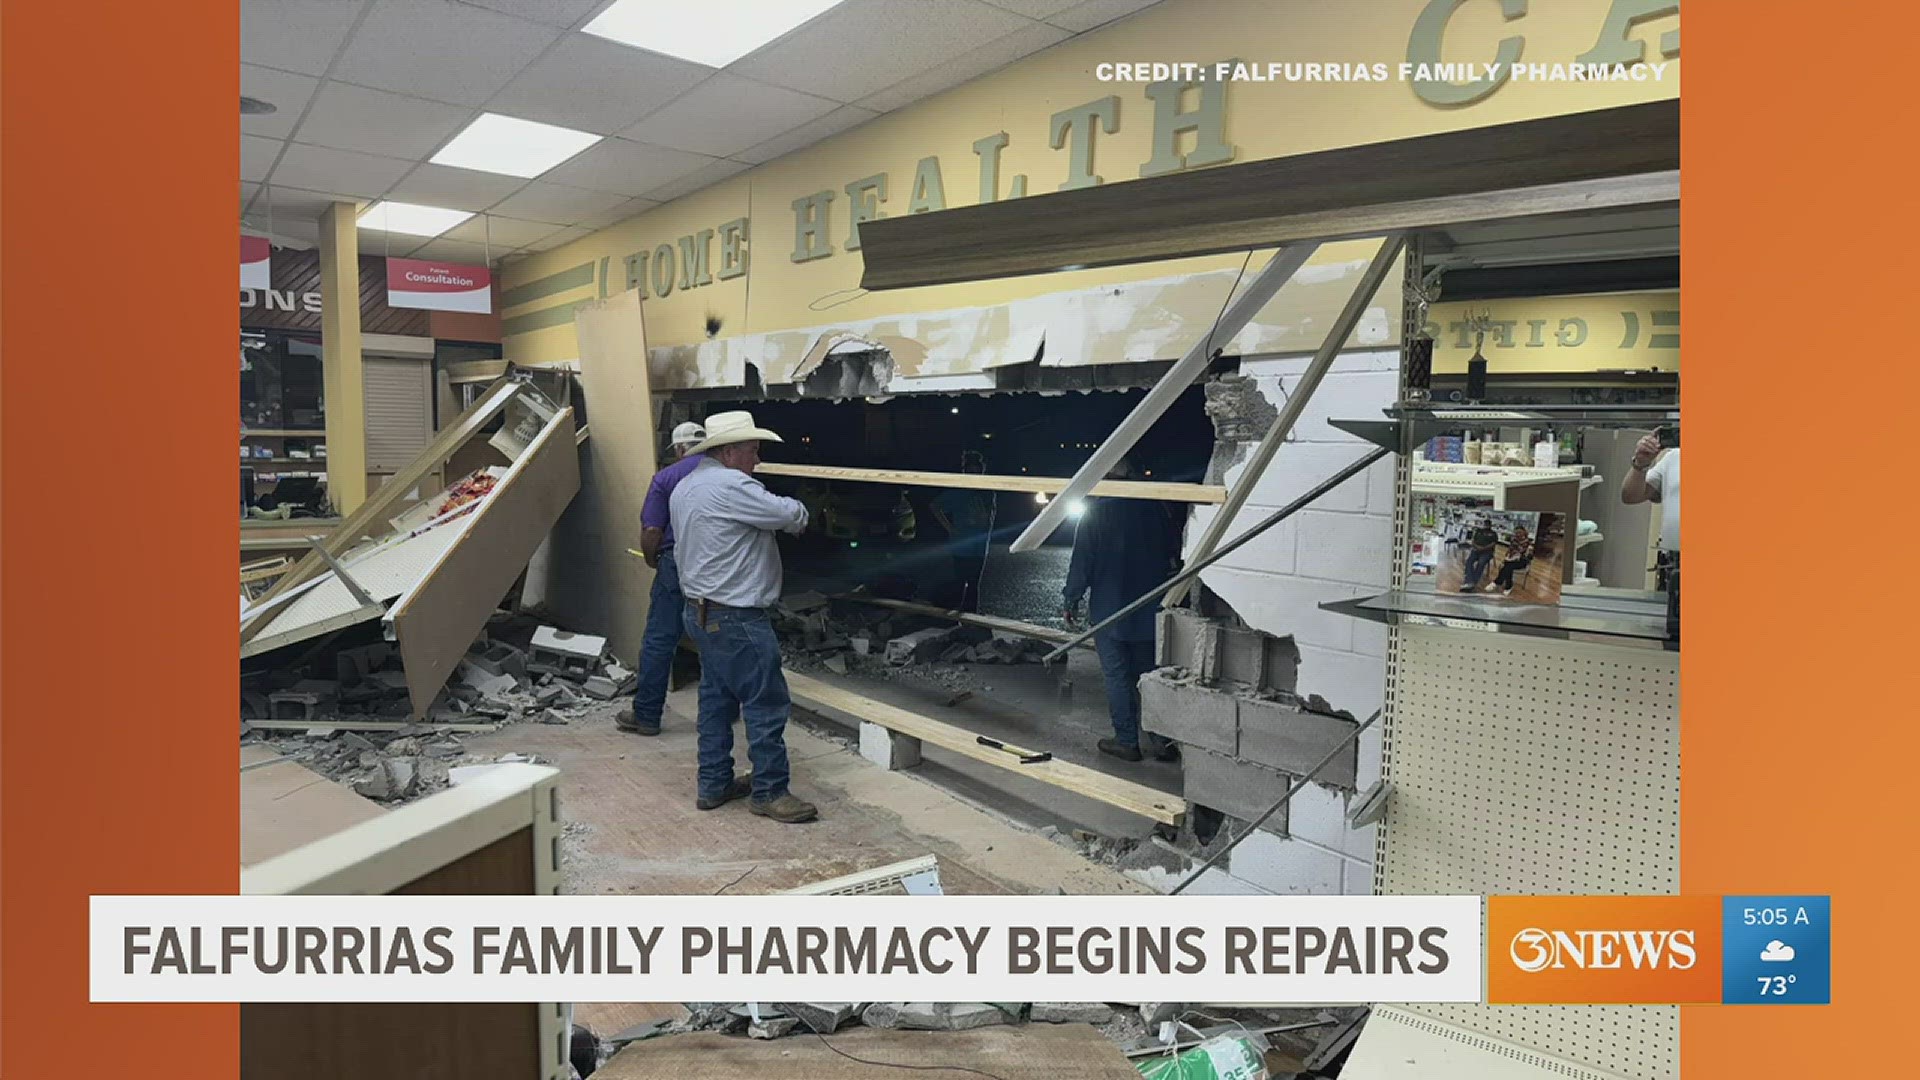 The pharmacy is hoping to be back up and running by next week. In the meantime, they are making home deliveries to customers.